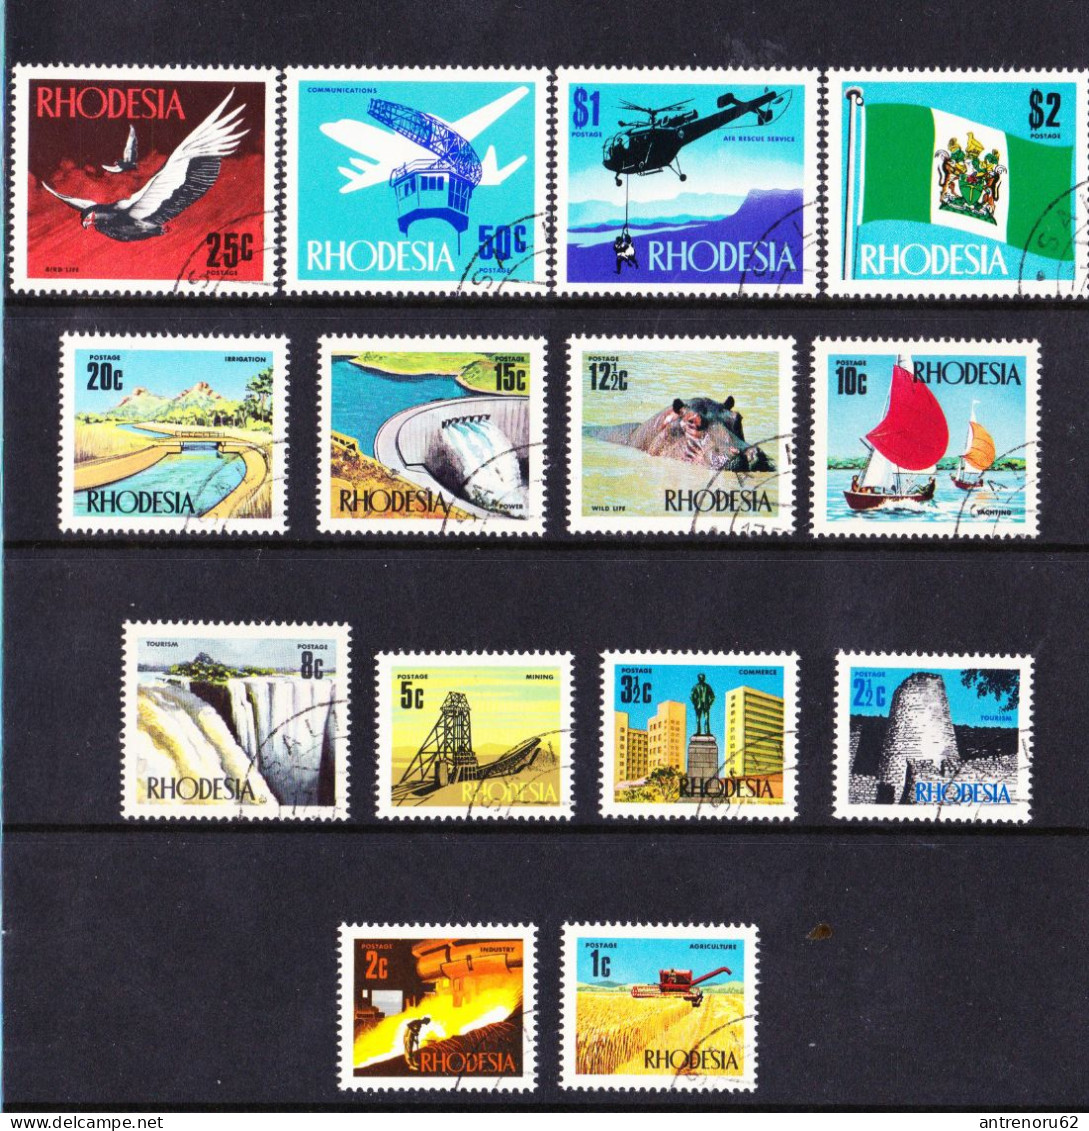 STAMPS-RHODESIA-1970-USED-SEE-SCAN-SET - Rodesia (1964-1980)